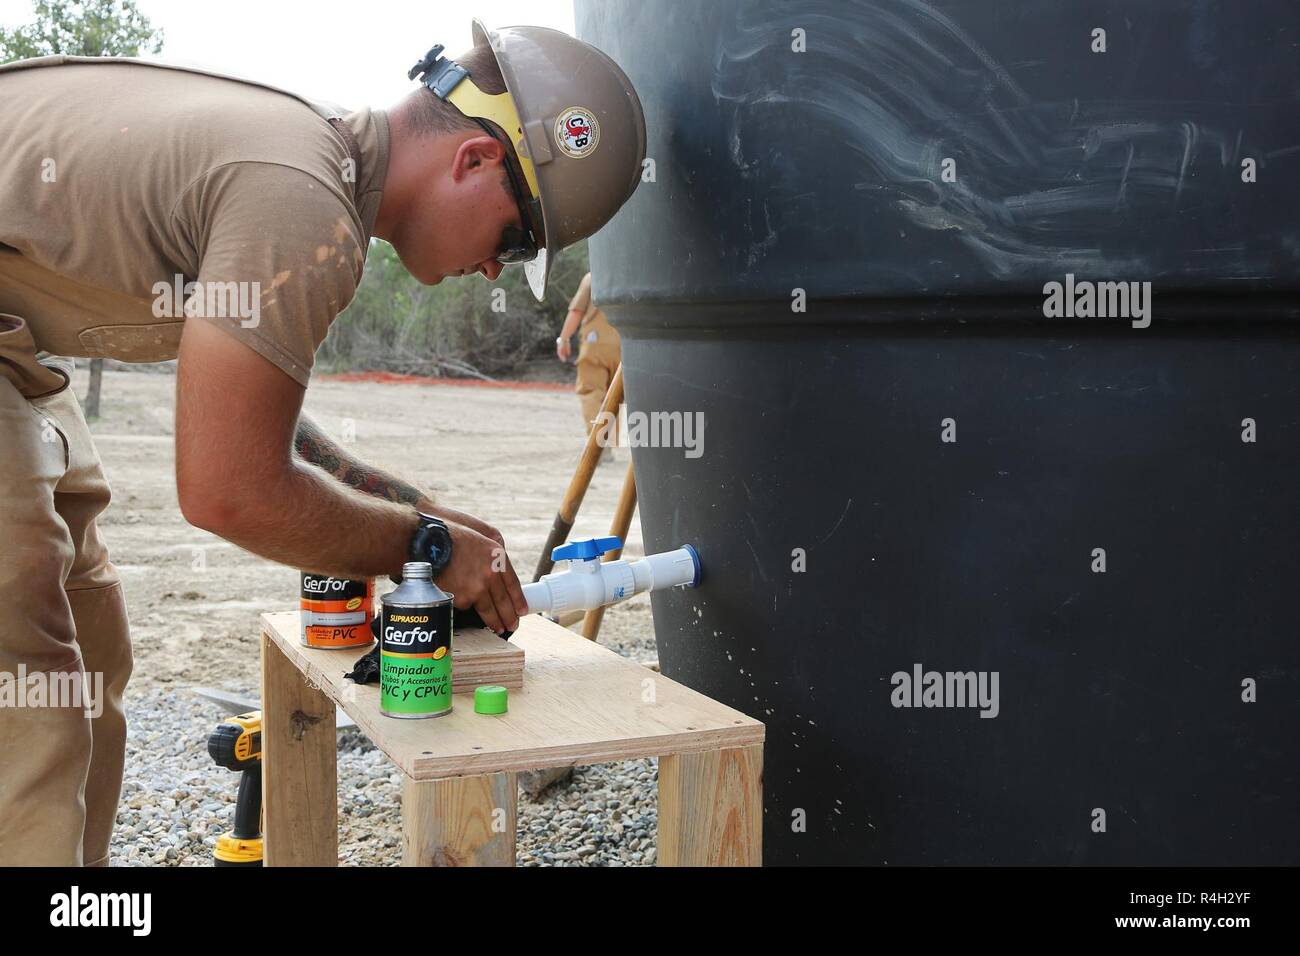 U.S. Navy Utilitiesman 2nd Class Anthony Calleja, assigned to Naval Mobile Construction Battalion (NMCB) 133, assembles the water outlet for the water storage system in Riohacha, Colombia, Sept. 27, 2018, during water-well drilling exploration operations as part of Southern Partnership Station 2018. Southern Partnership Station is a U.S. Southern Command-sponsored and U.S. Naval Forces Southern Command/U.S. 4th Fleet-conducted annual deployment focused on subject matter expert exchanges and building partner capacity in a variety of disciplines including medicine, construction and dive operatio Stock Photo